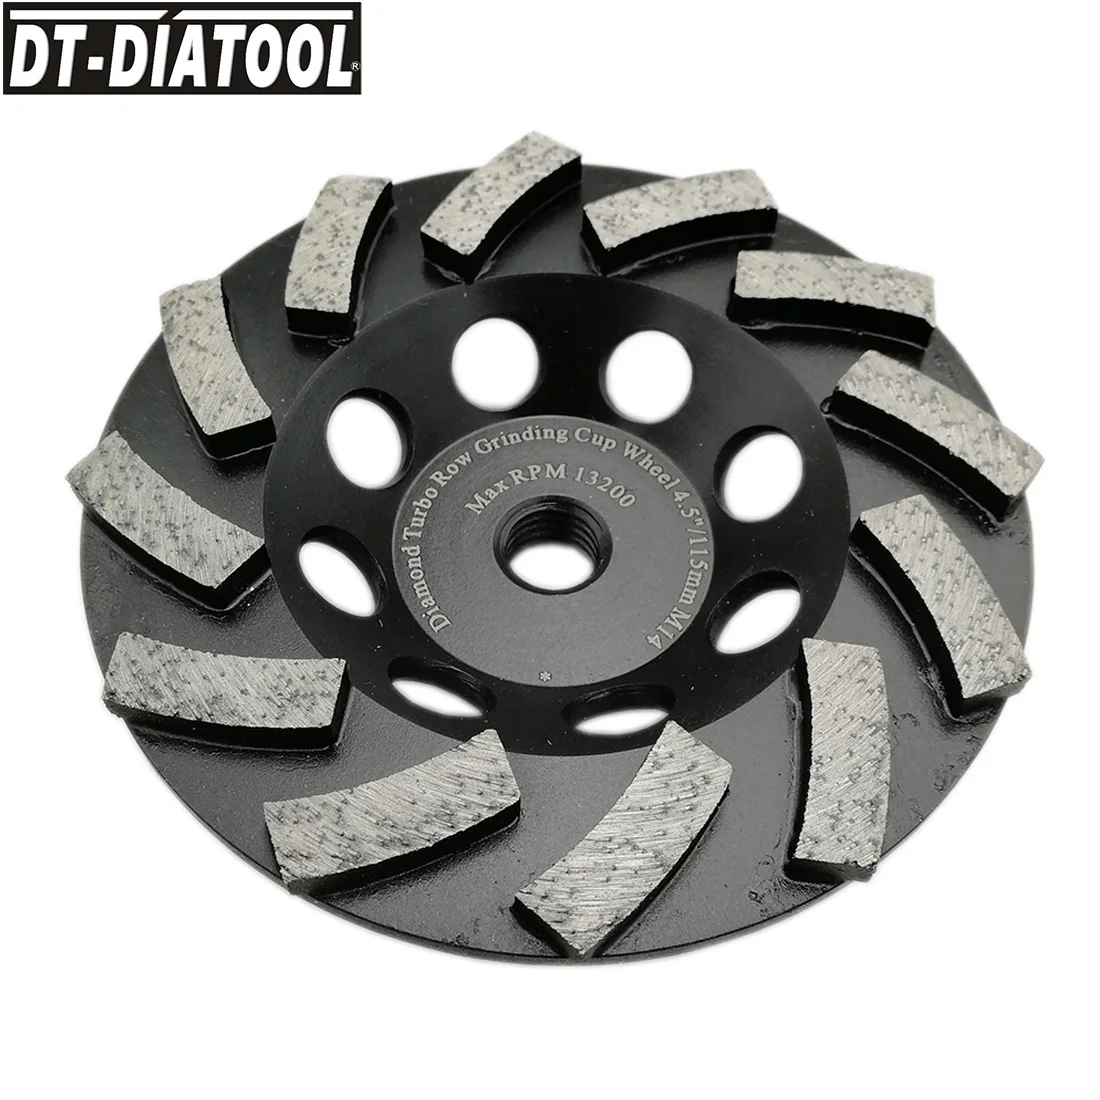 

1piece Diamond Segmented Concrete Turbo Row Cup Grinding Wheel for Concrete Hard Stone with M14 Connection Dia 115mm/4.5"